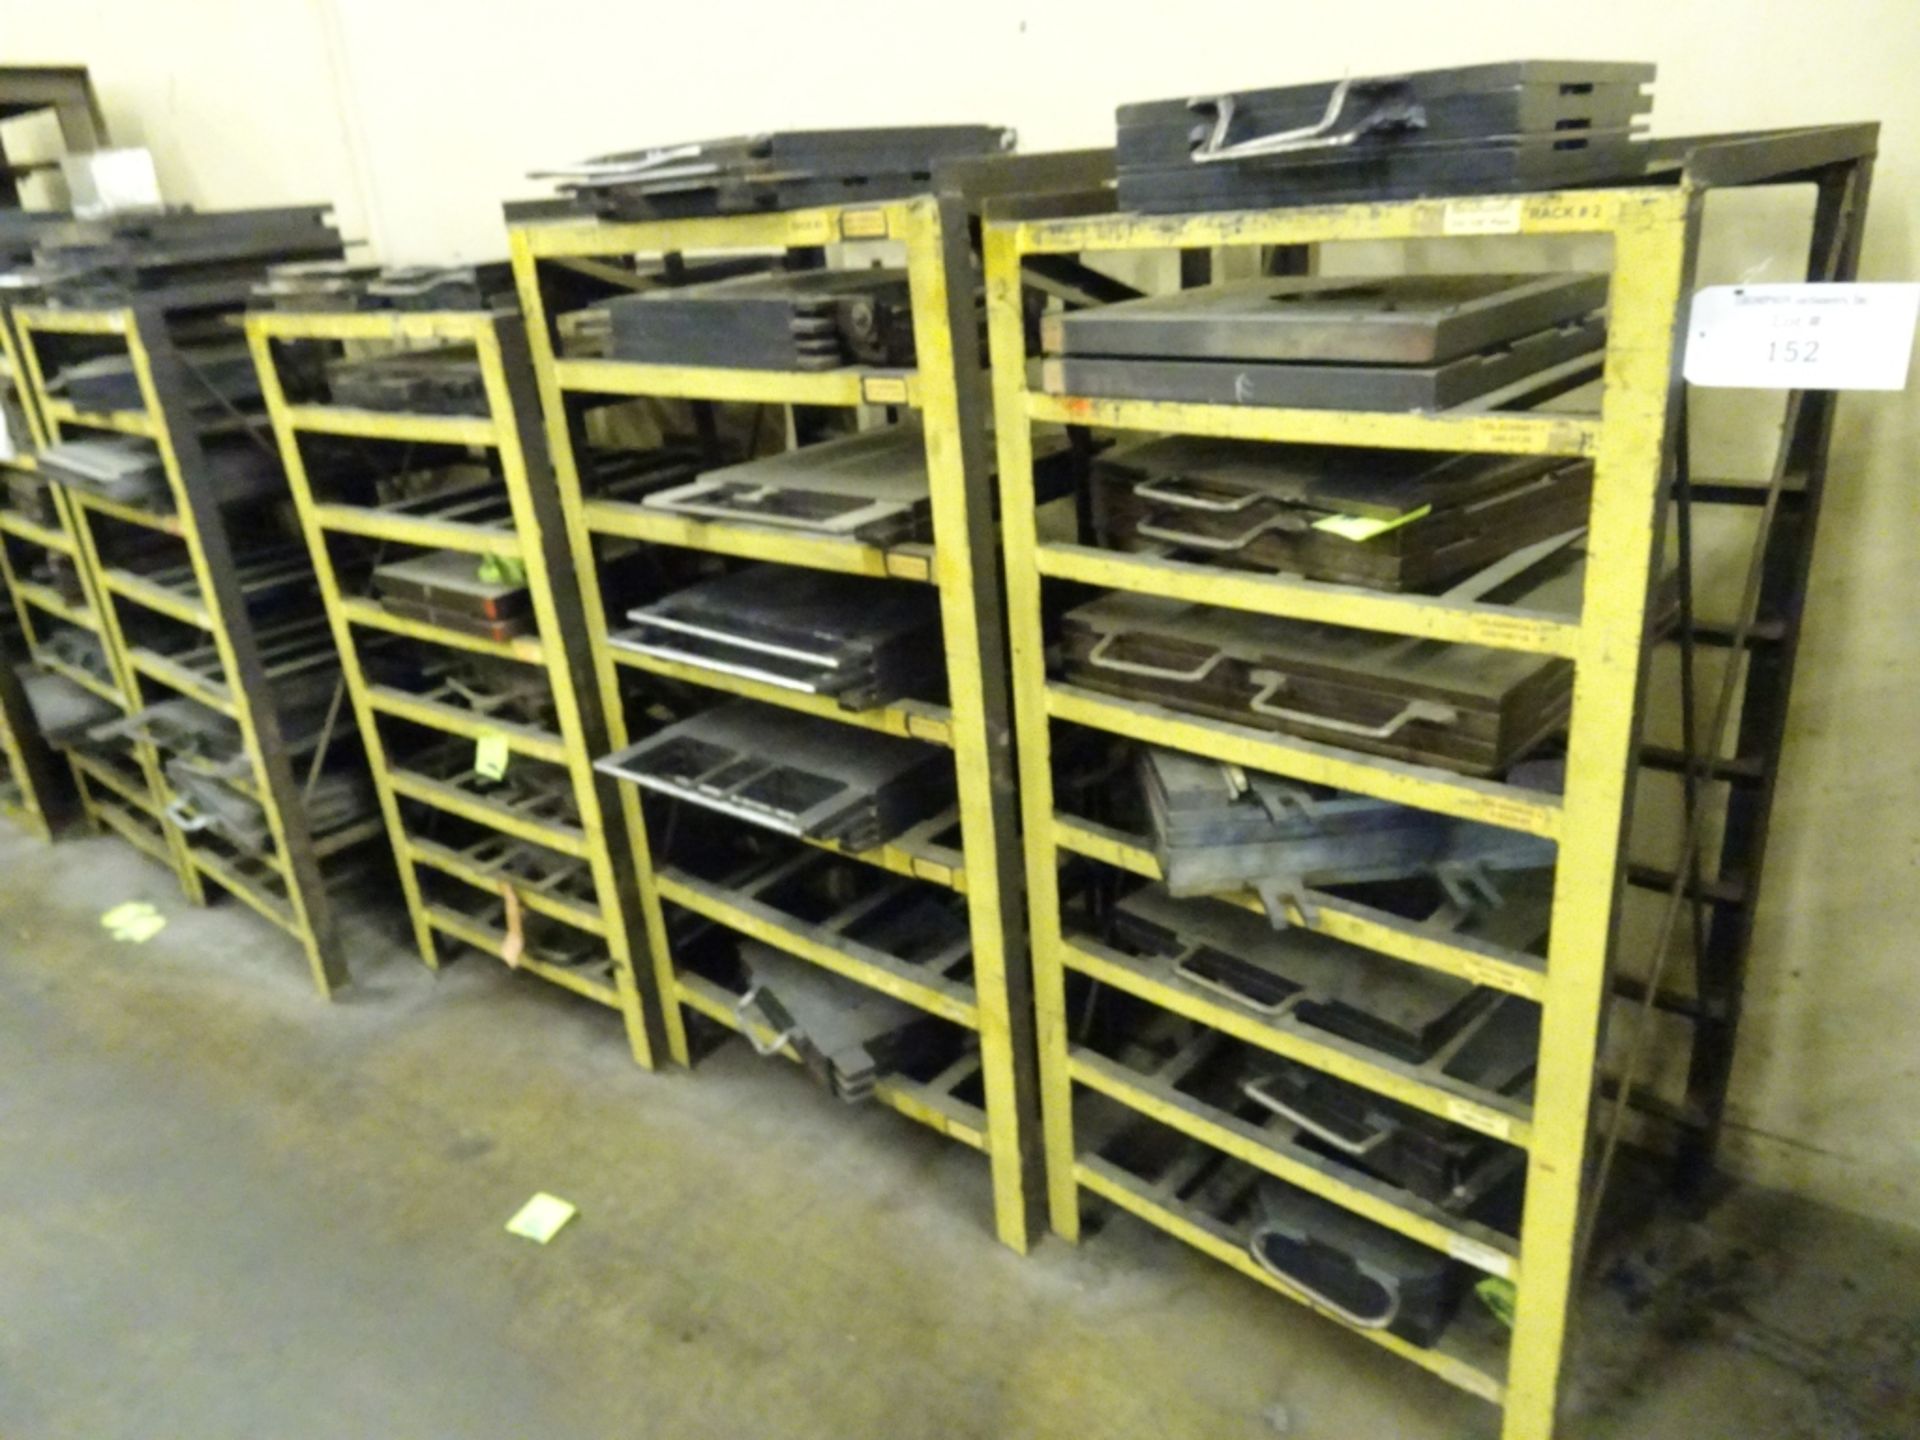 (14) Various Sized Heavy Duty Steel Mold Racks With No Contents - Image 4 of 6